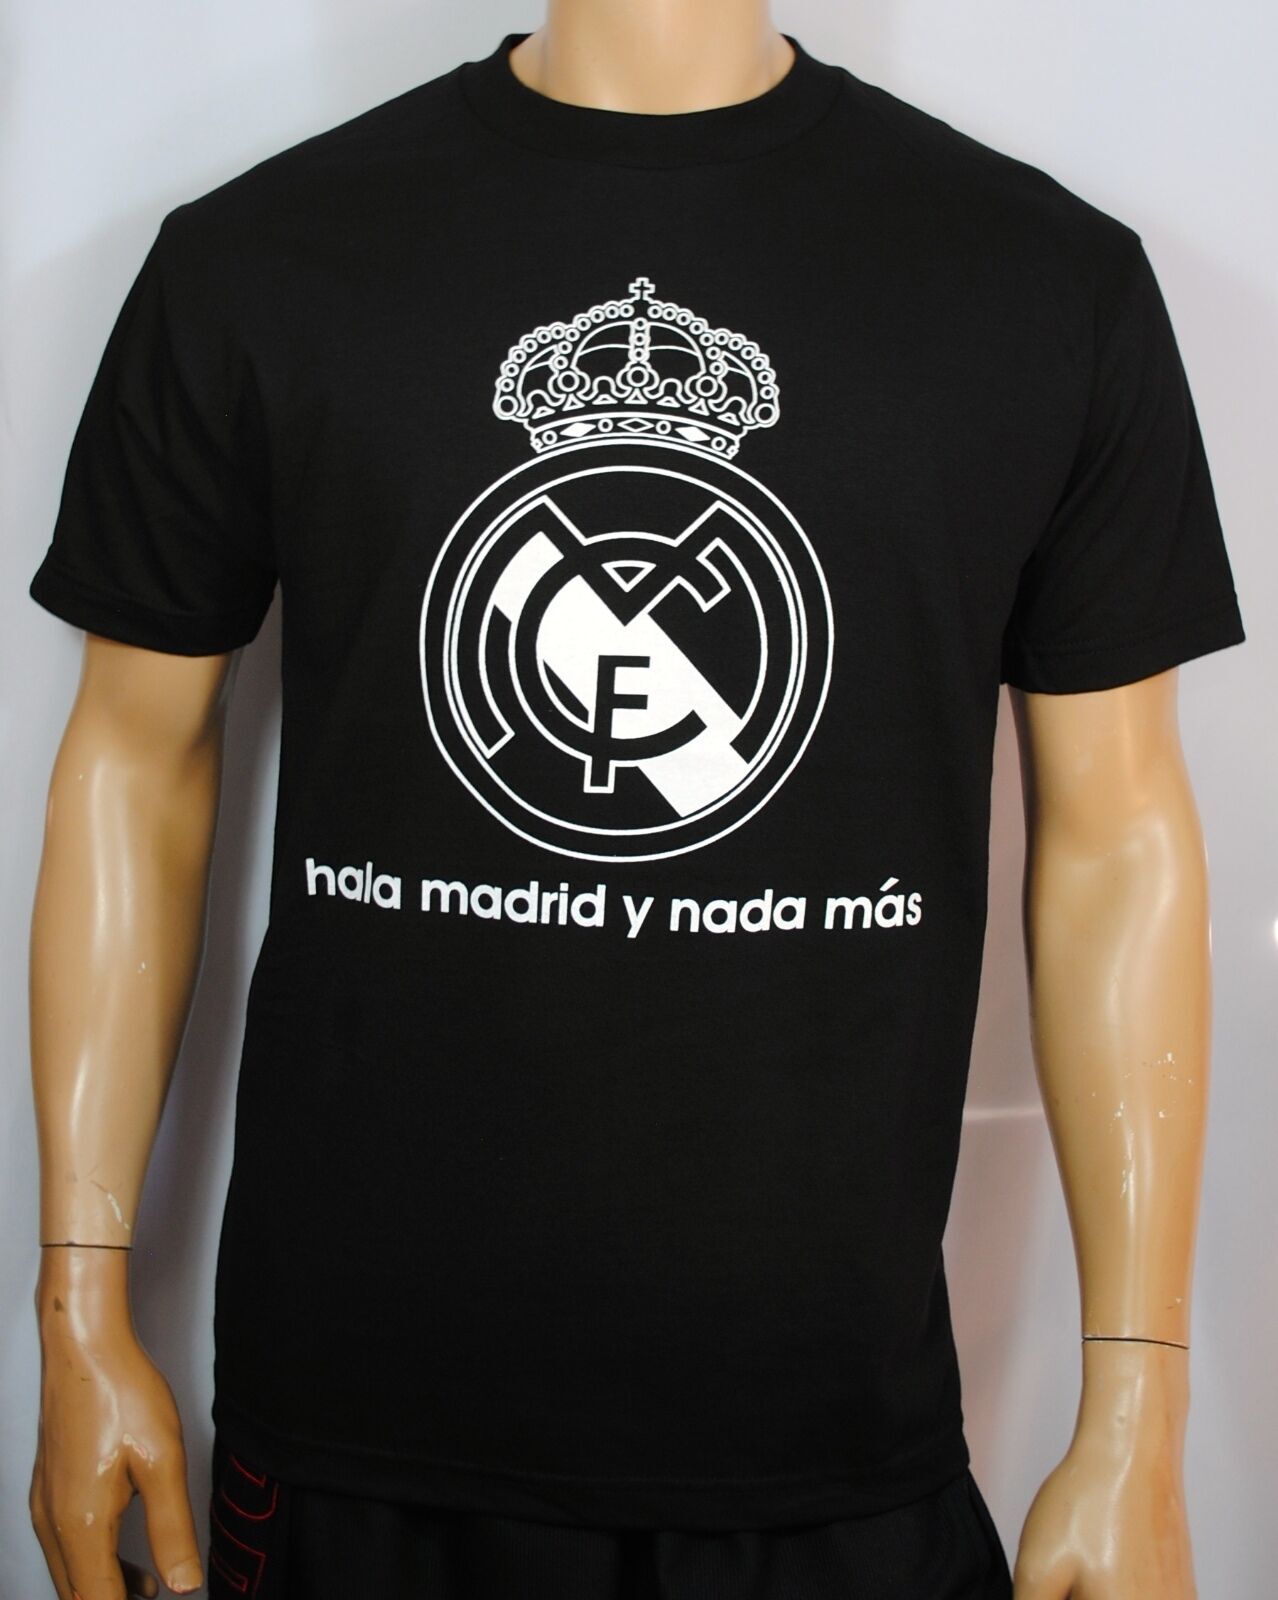 The Ultimate Real Madrid T-Shirt Collection for Fashion-Forward Fans